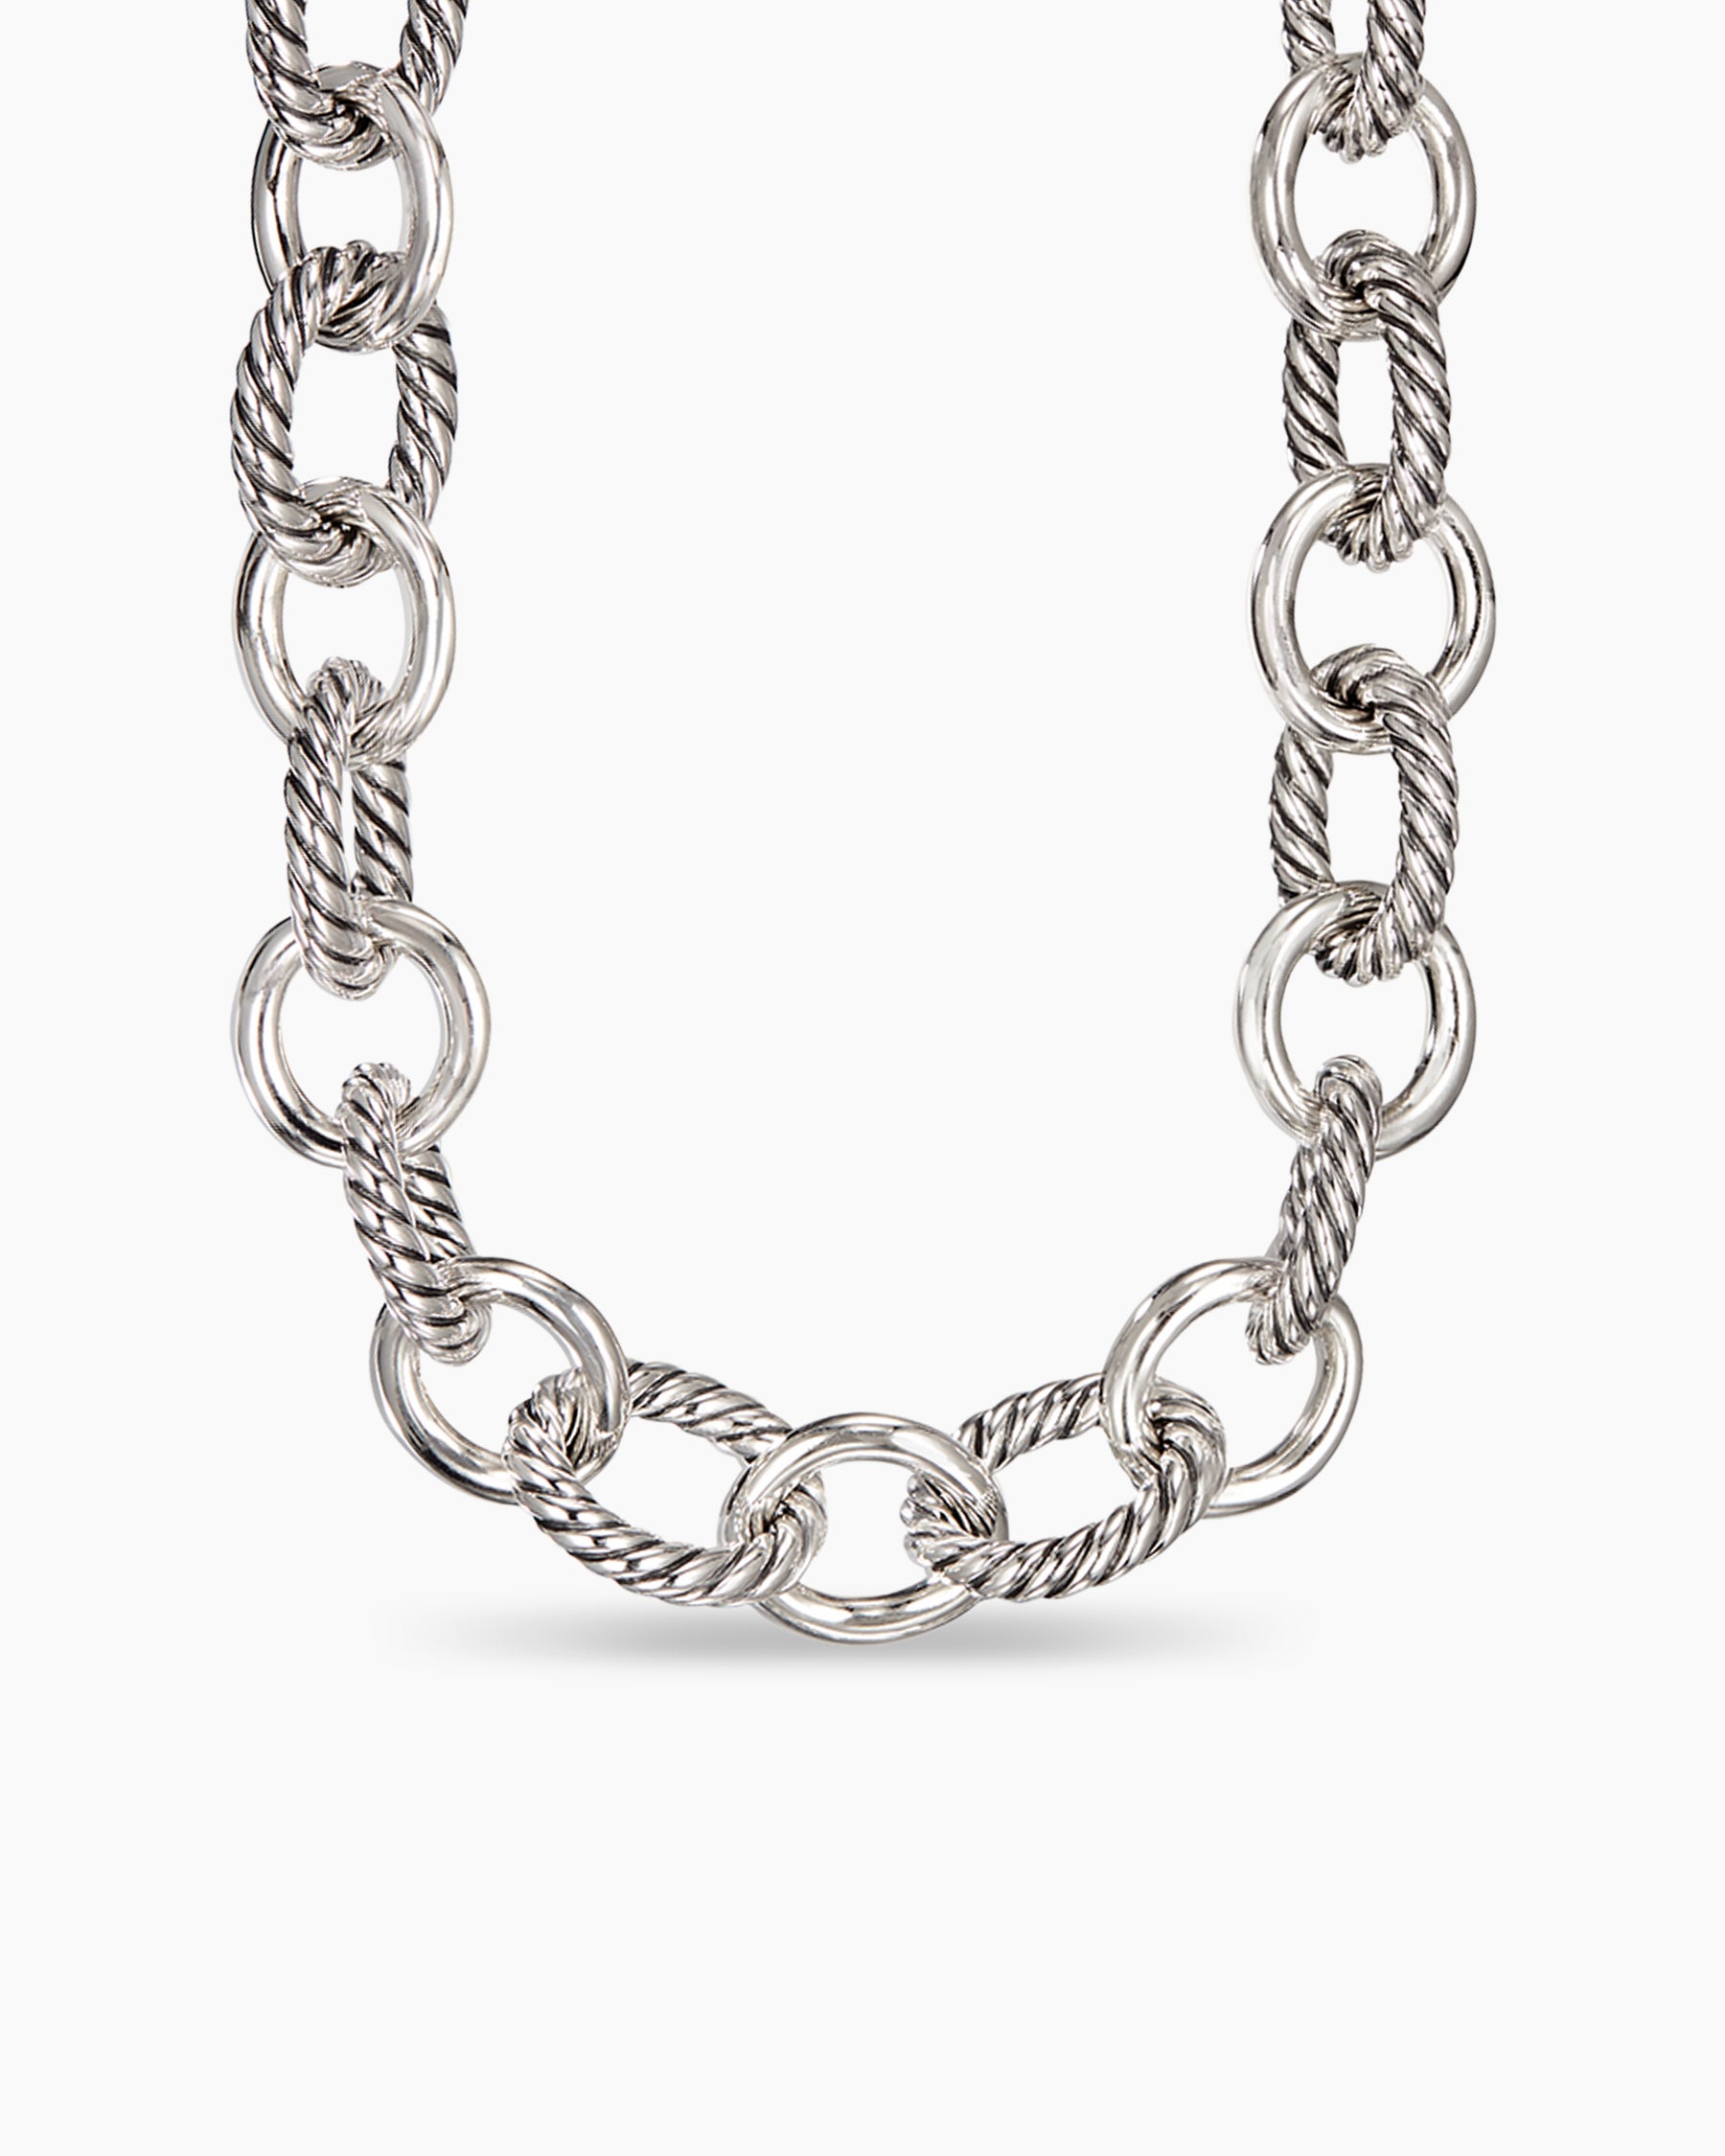 LED Silver Chain Link Necklace